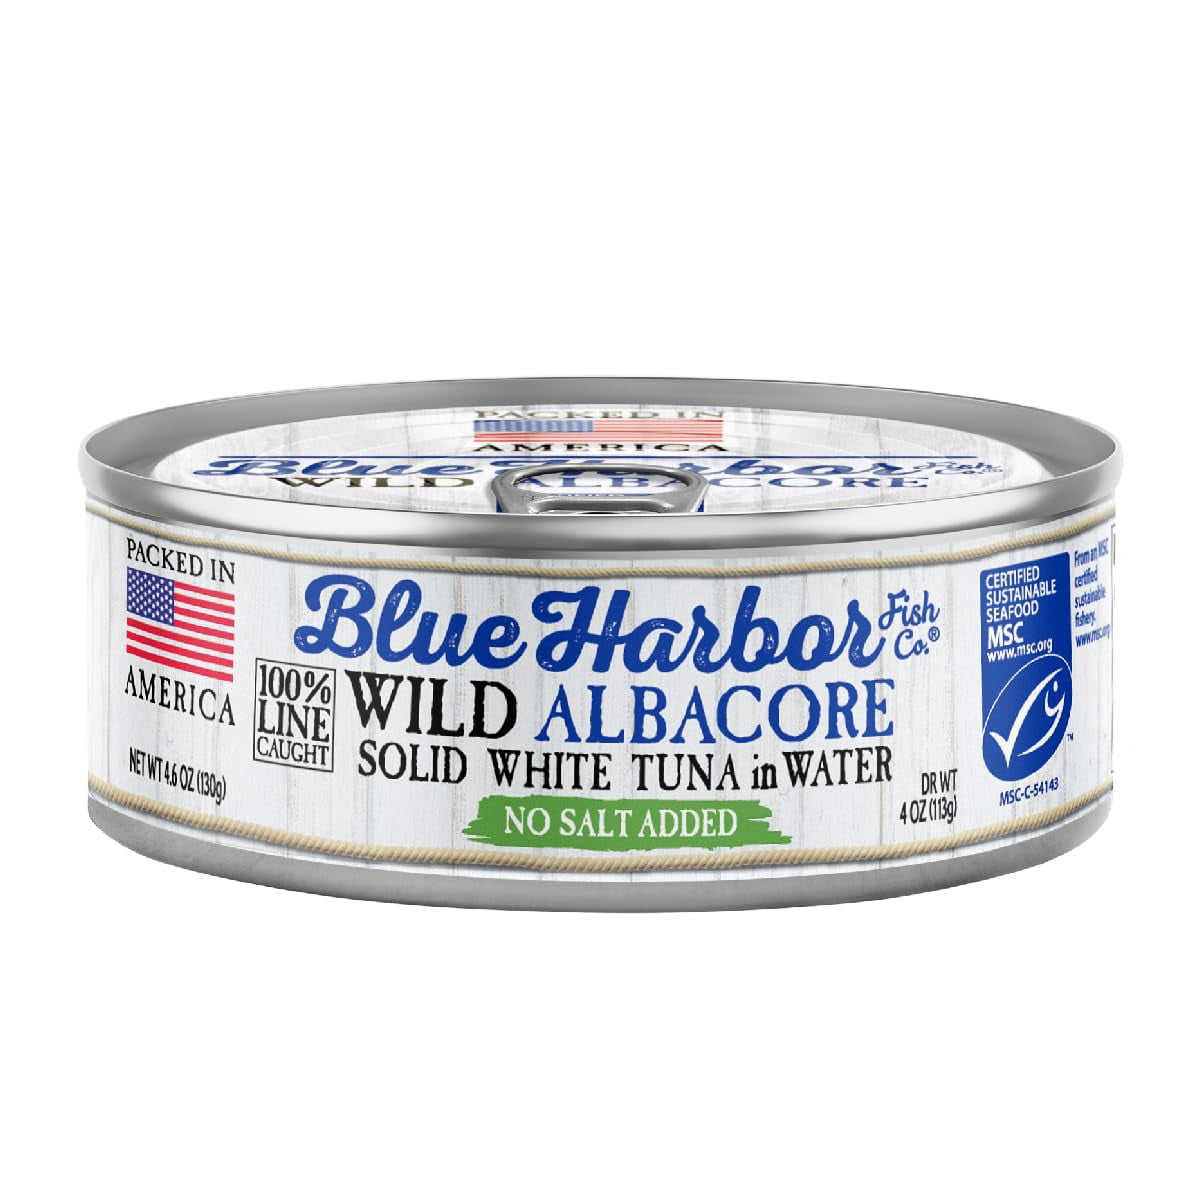 Wild Albacore Solid White Tuna in Water No Salt Added - 4.6 oz Can (Pack of  12)